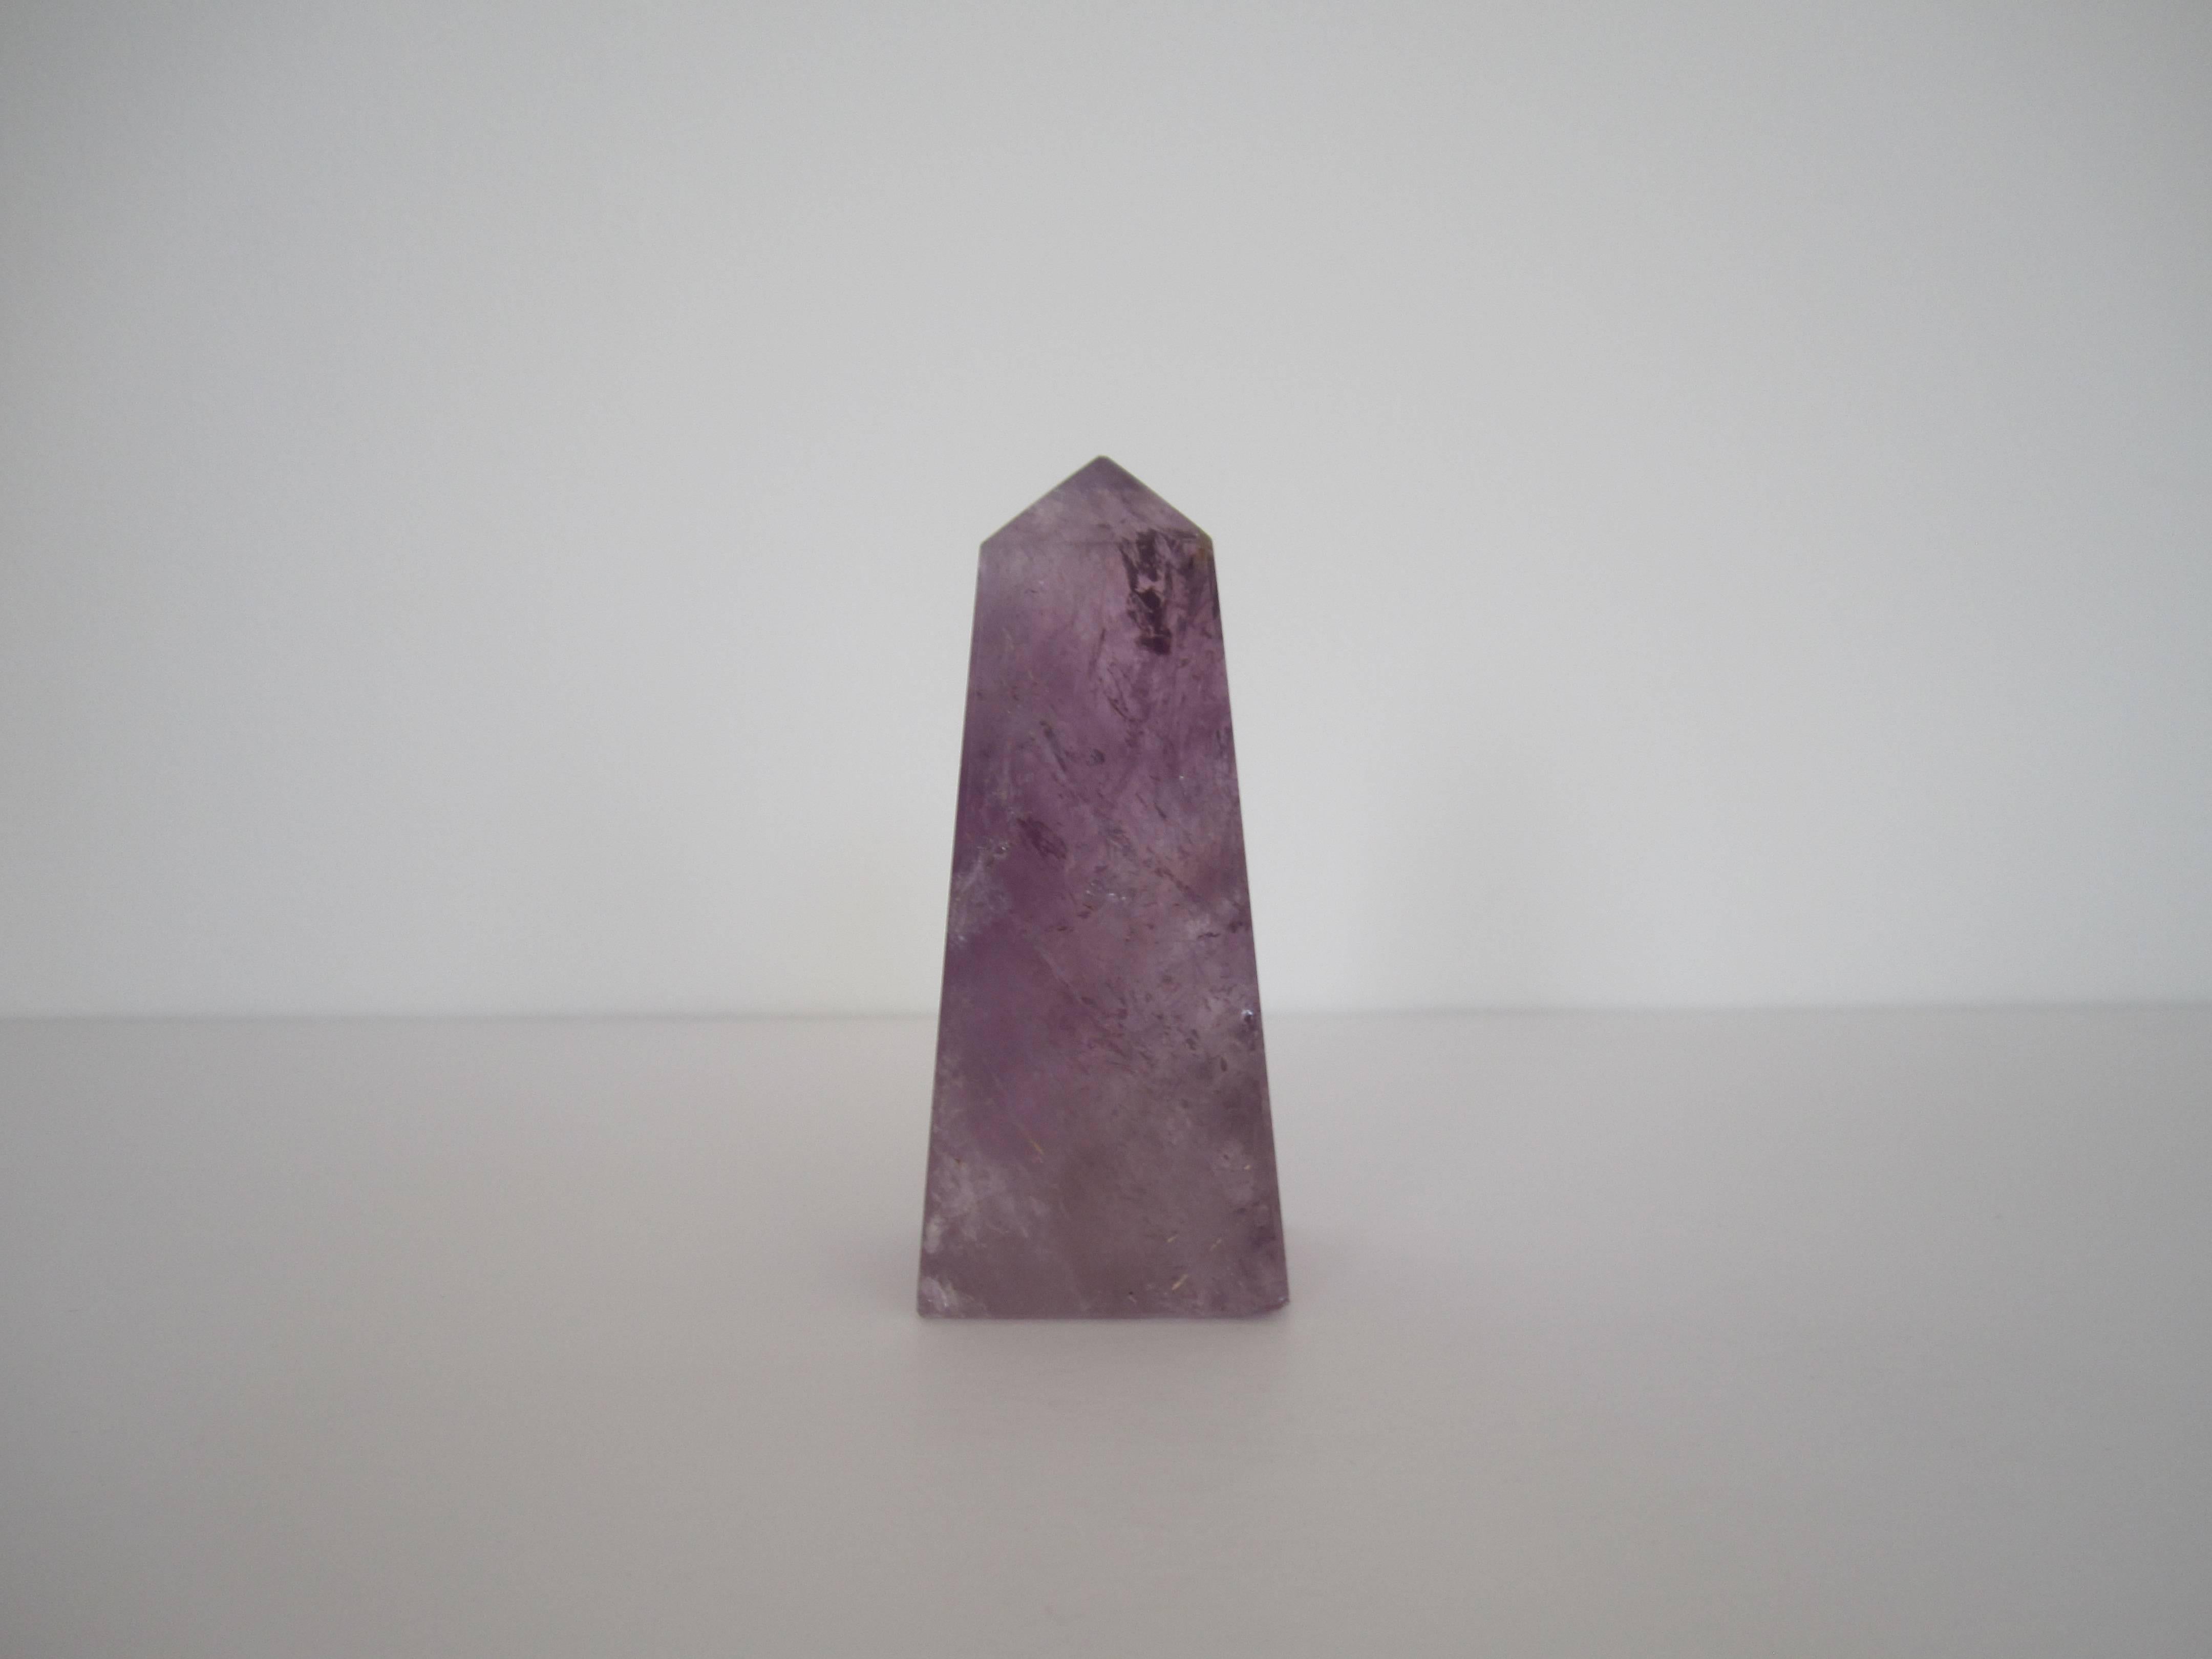 A beautiful Modern style purple amethyst stone obelisk sculpture piece decorative object. Amethyst obelisk is hand-carved and polished smooth. A great decorative object or desk accessory. 3.75